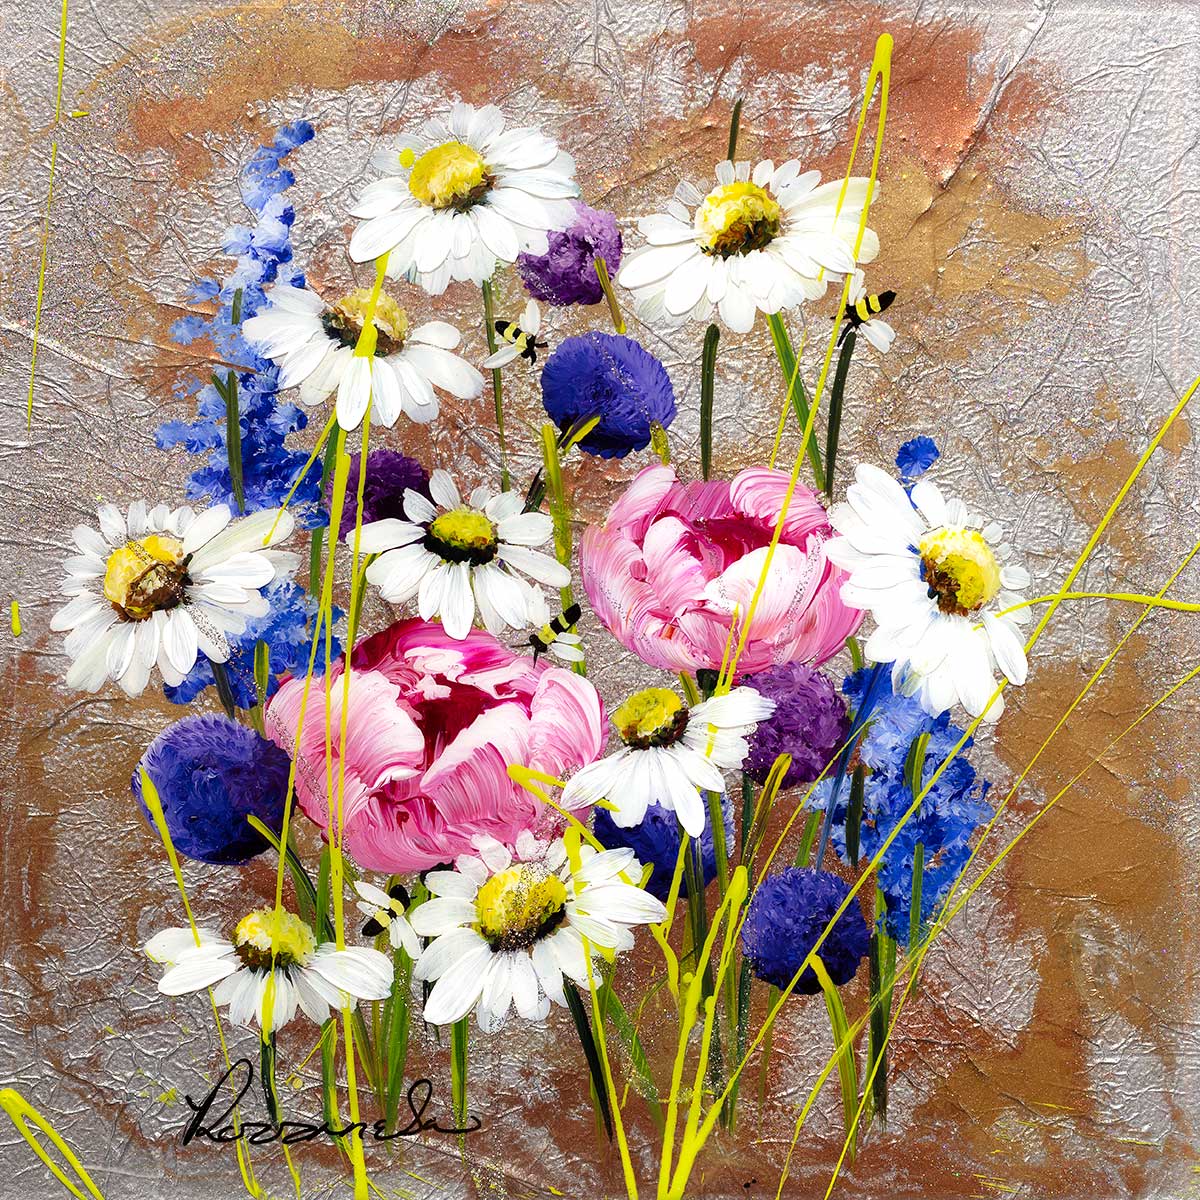 Flowers and Daisies - Original - SOLD